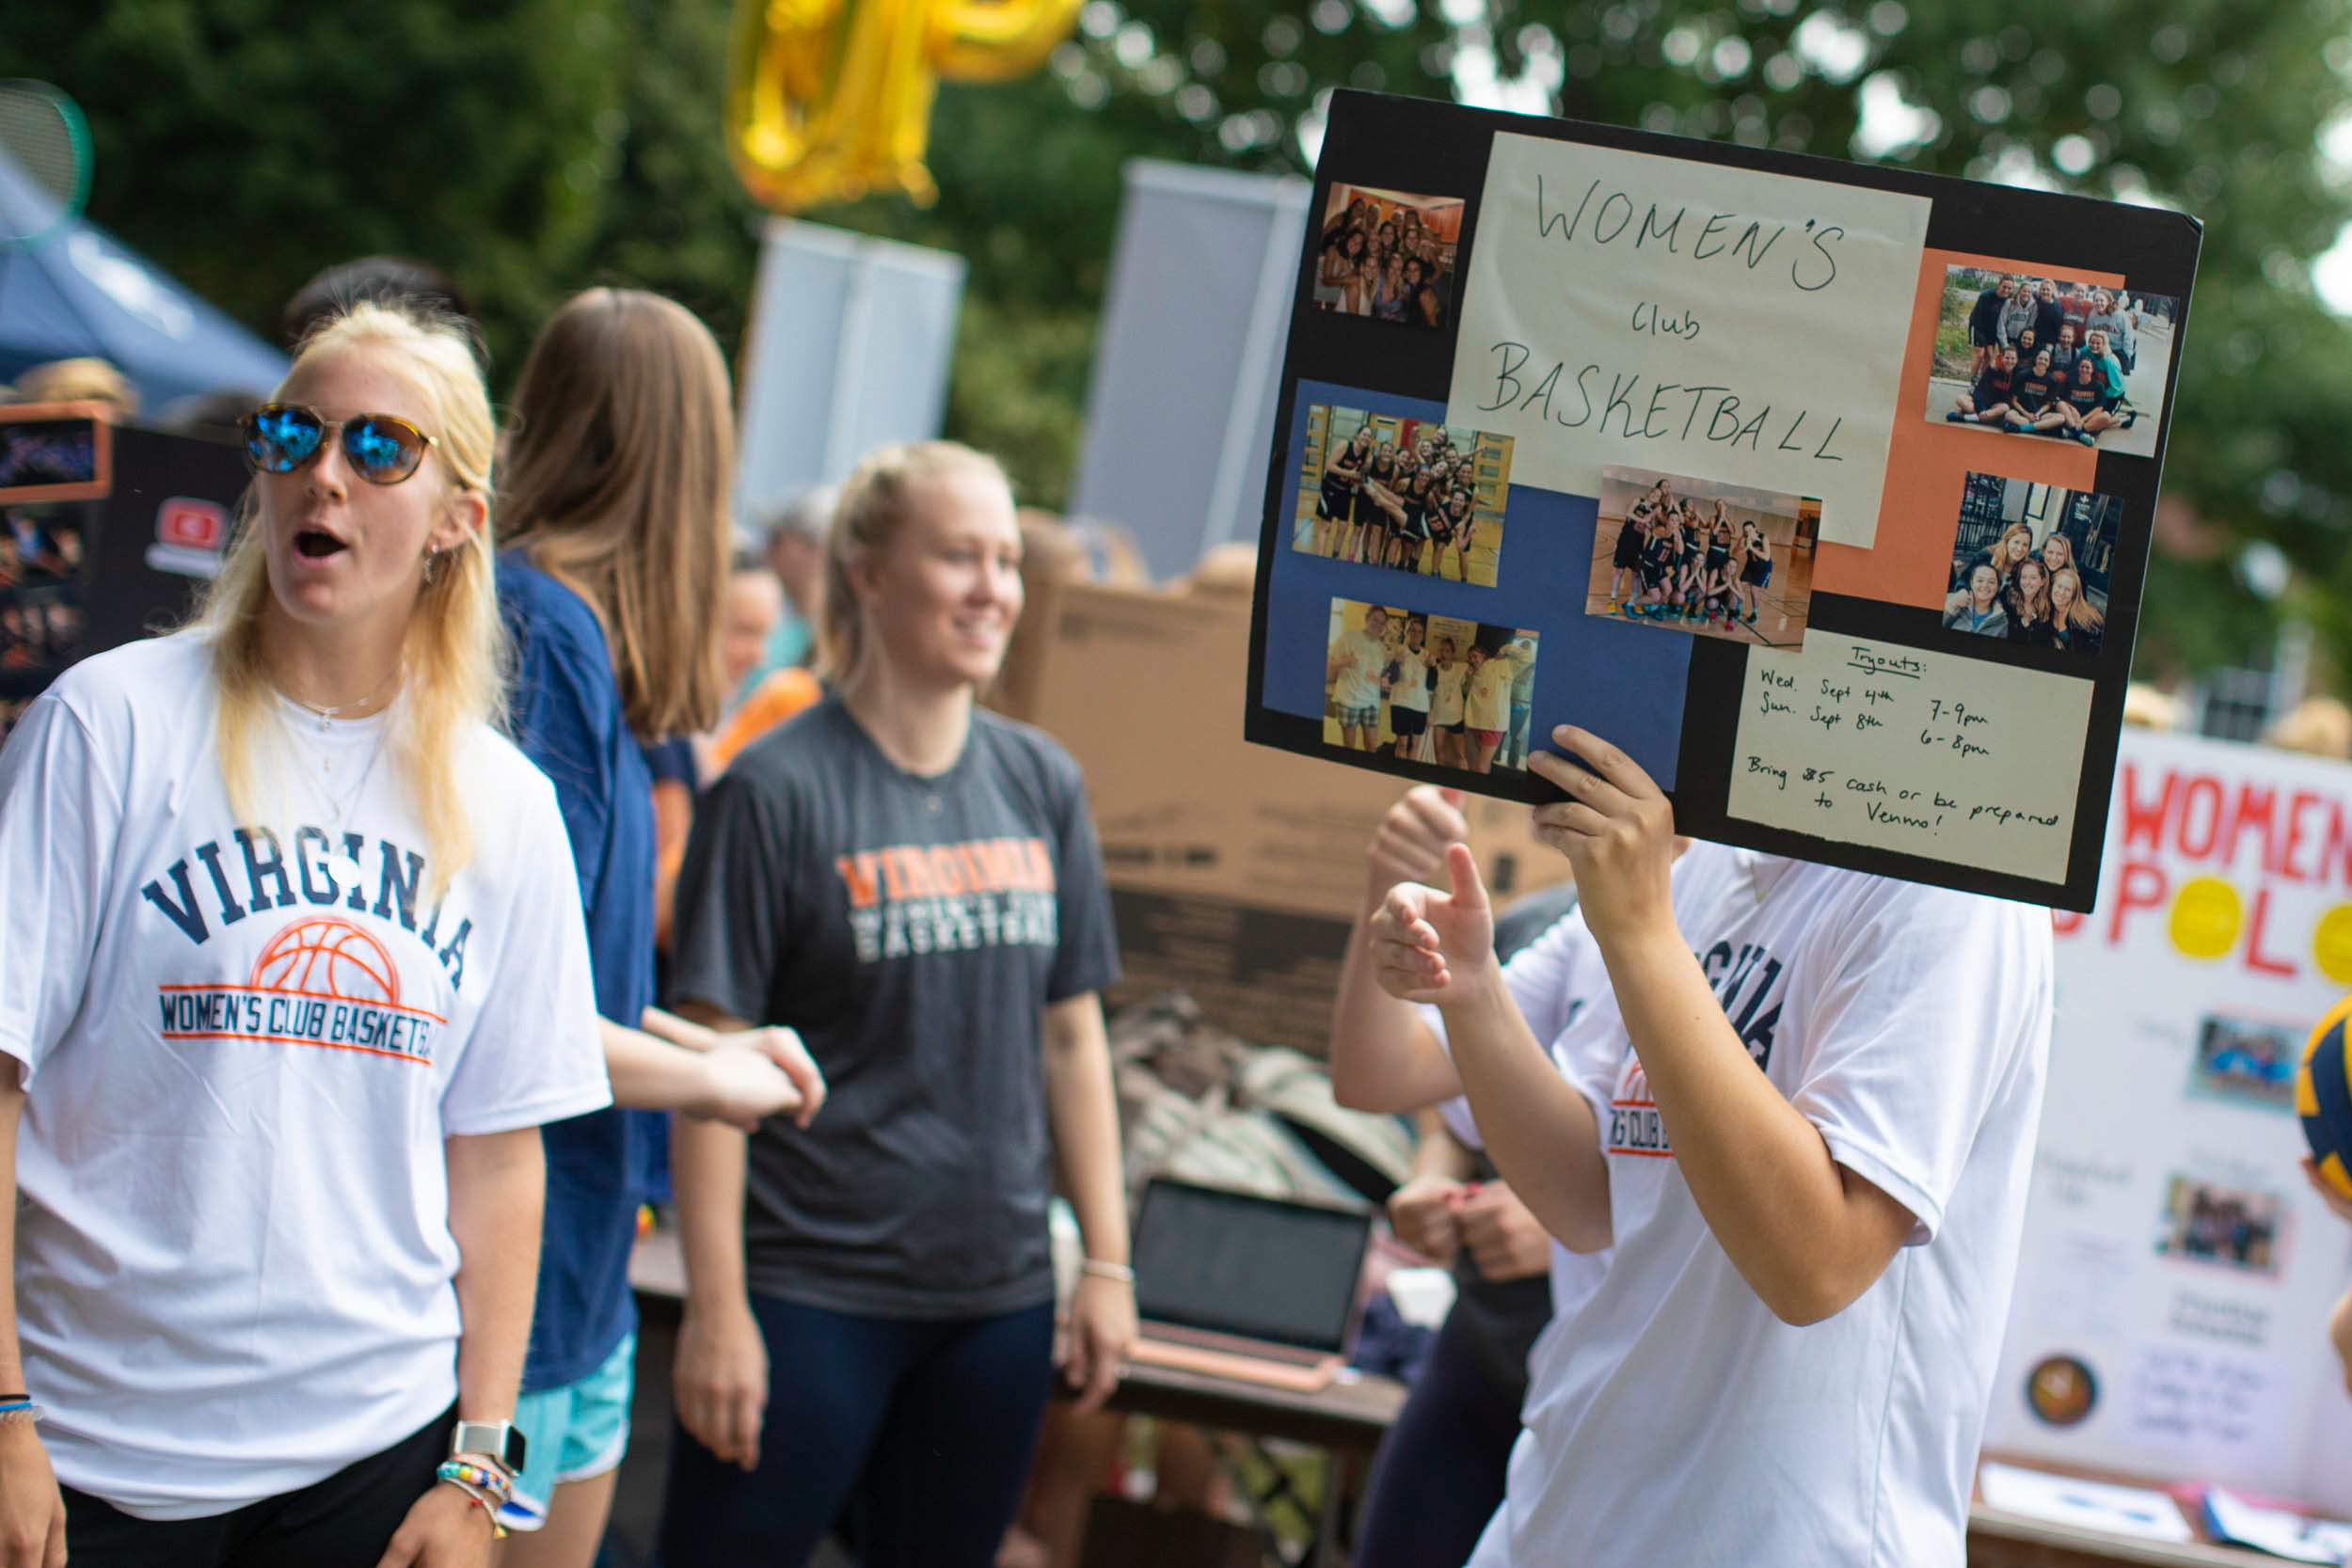 Activity fair with a student holding a sign that says Women's Club Basketball